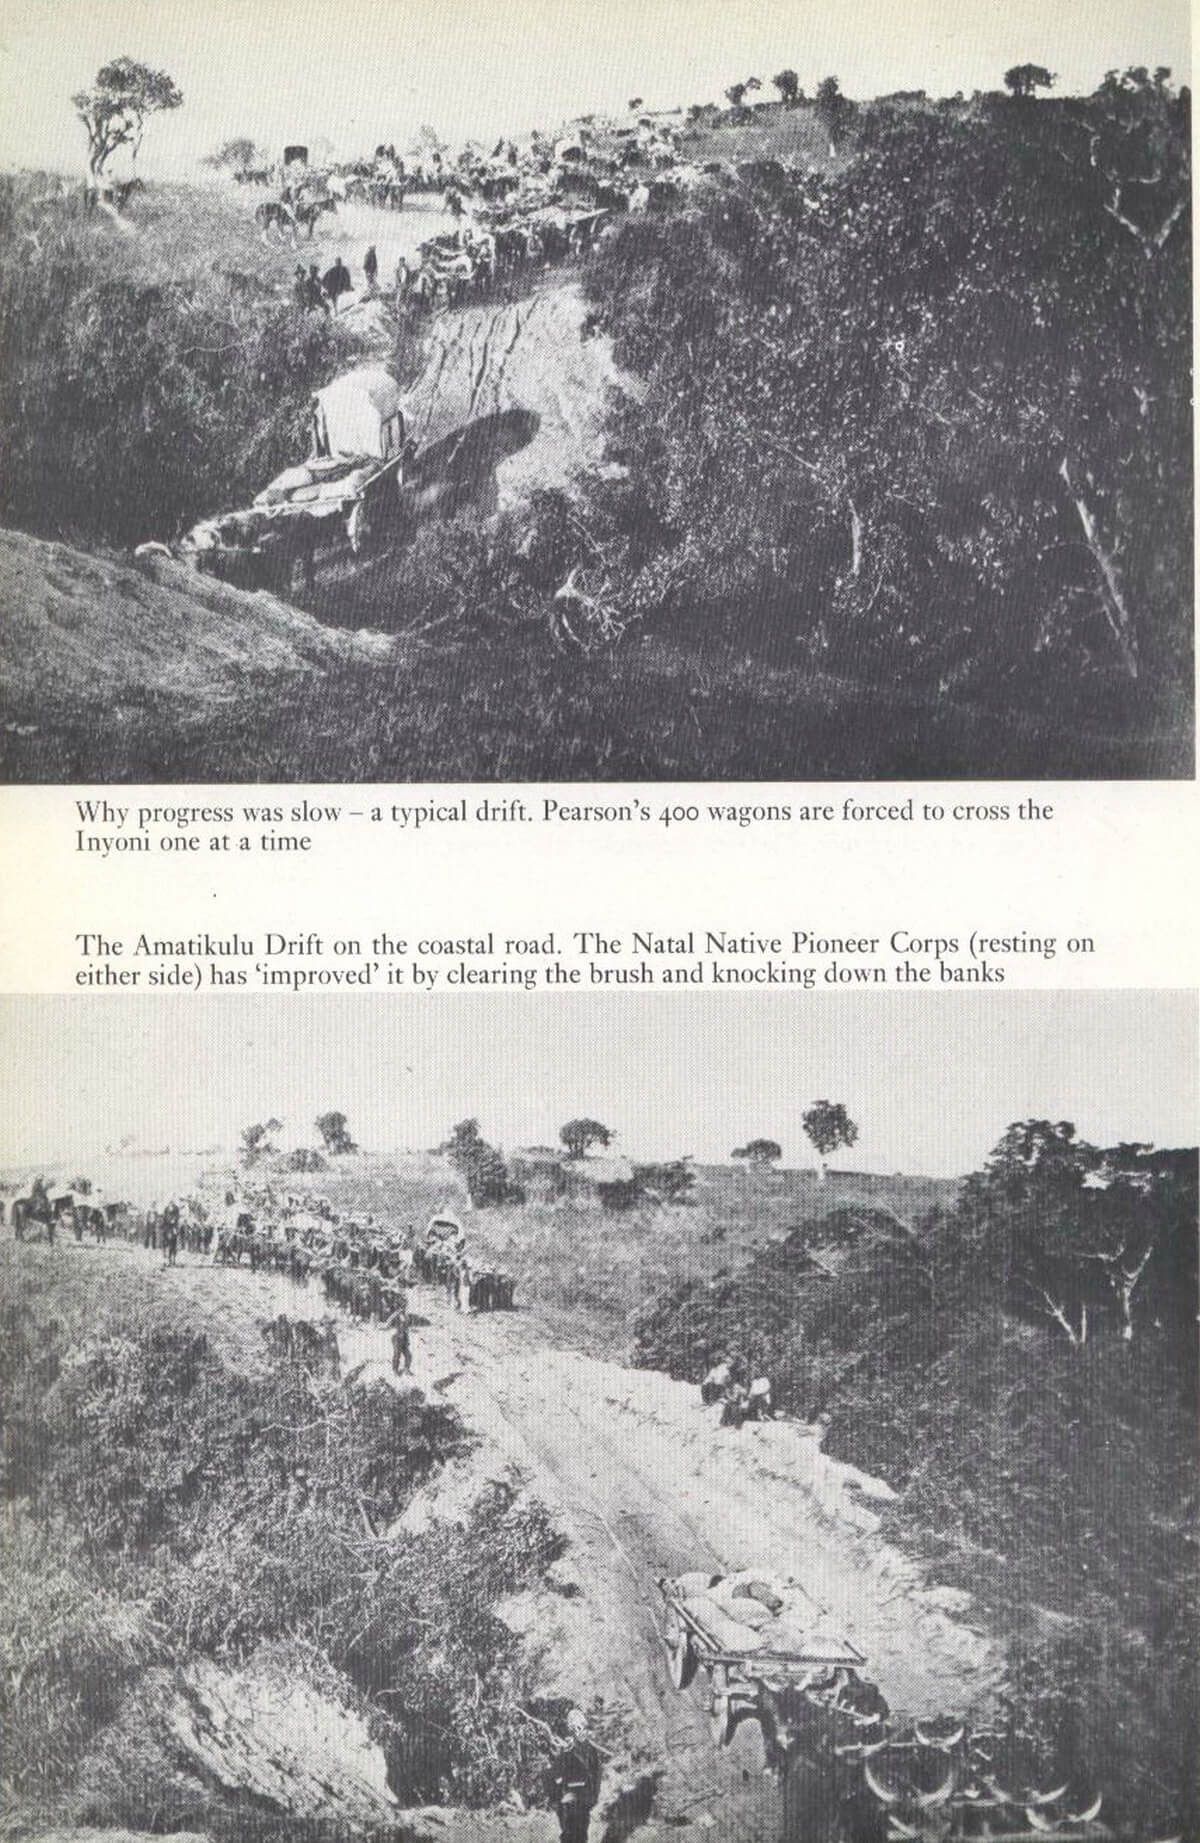 Pearson’s earlier advance along these roads in dry weather – in the perpetual rain accompanying the invasion they were quagmires